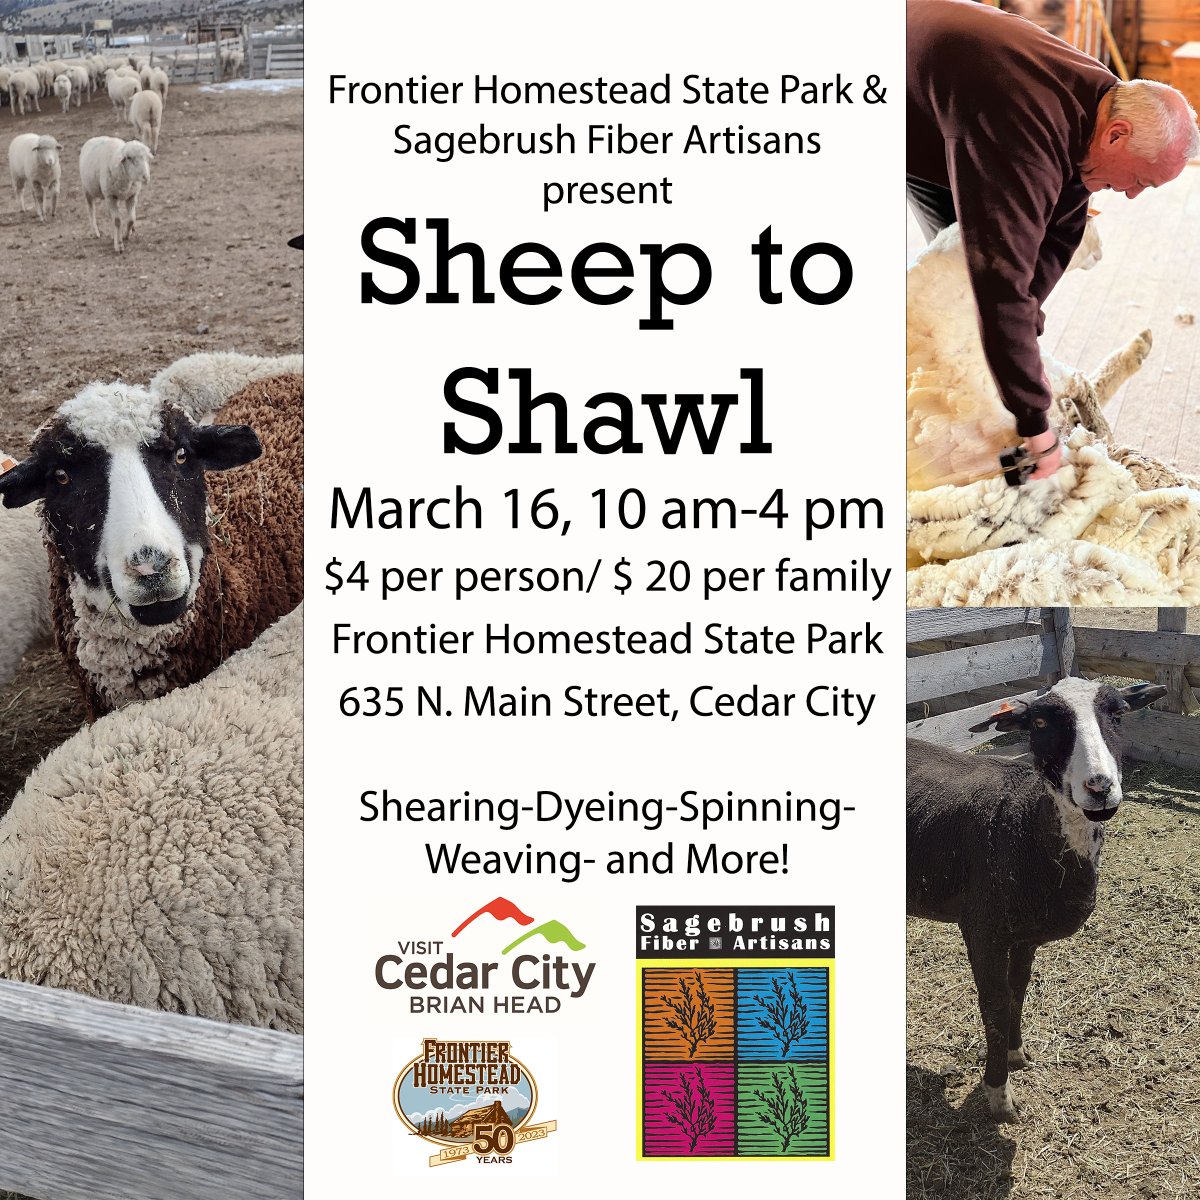 Don't miss Sheep to Shawl at Frontier Homestead State Park on March 16! 🐑 Enjoy live shearing demos, hands-on activities, and family fun from 10 am - 4 pm. Learn more here: stateparks.utah.gov/2024/03/12/she… And stay tuned for more spring adventures at Utah's state parks!